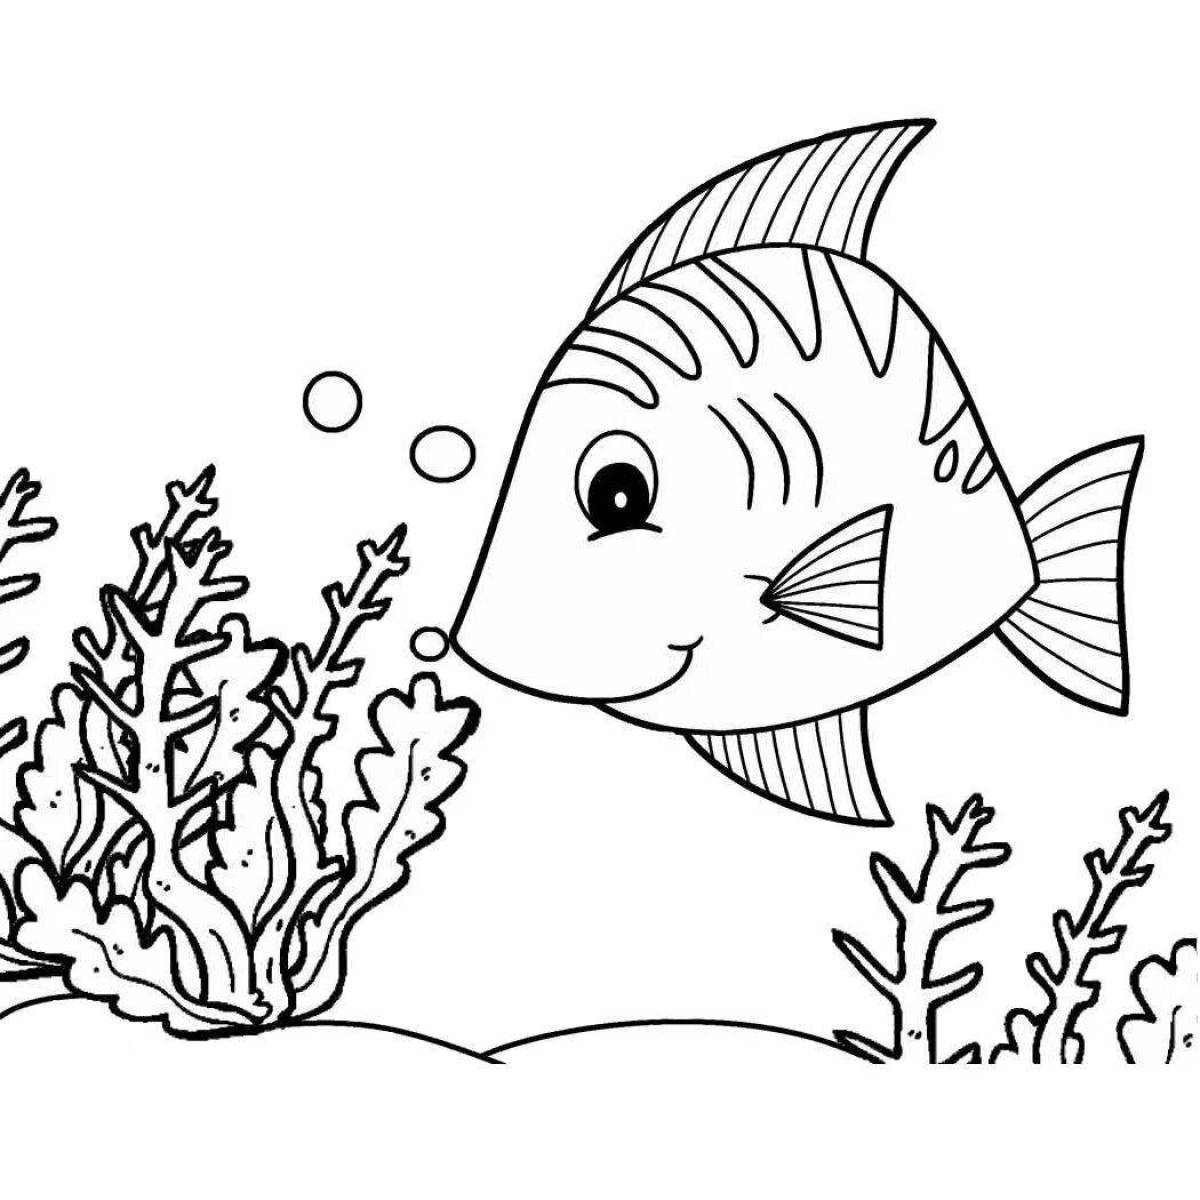 Magic fish coloring book for 3-4 year olds